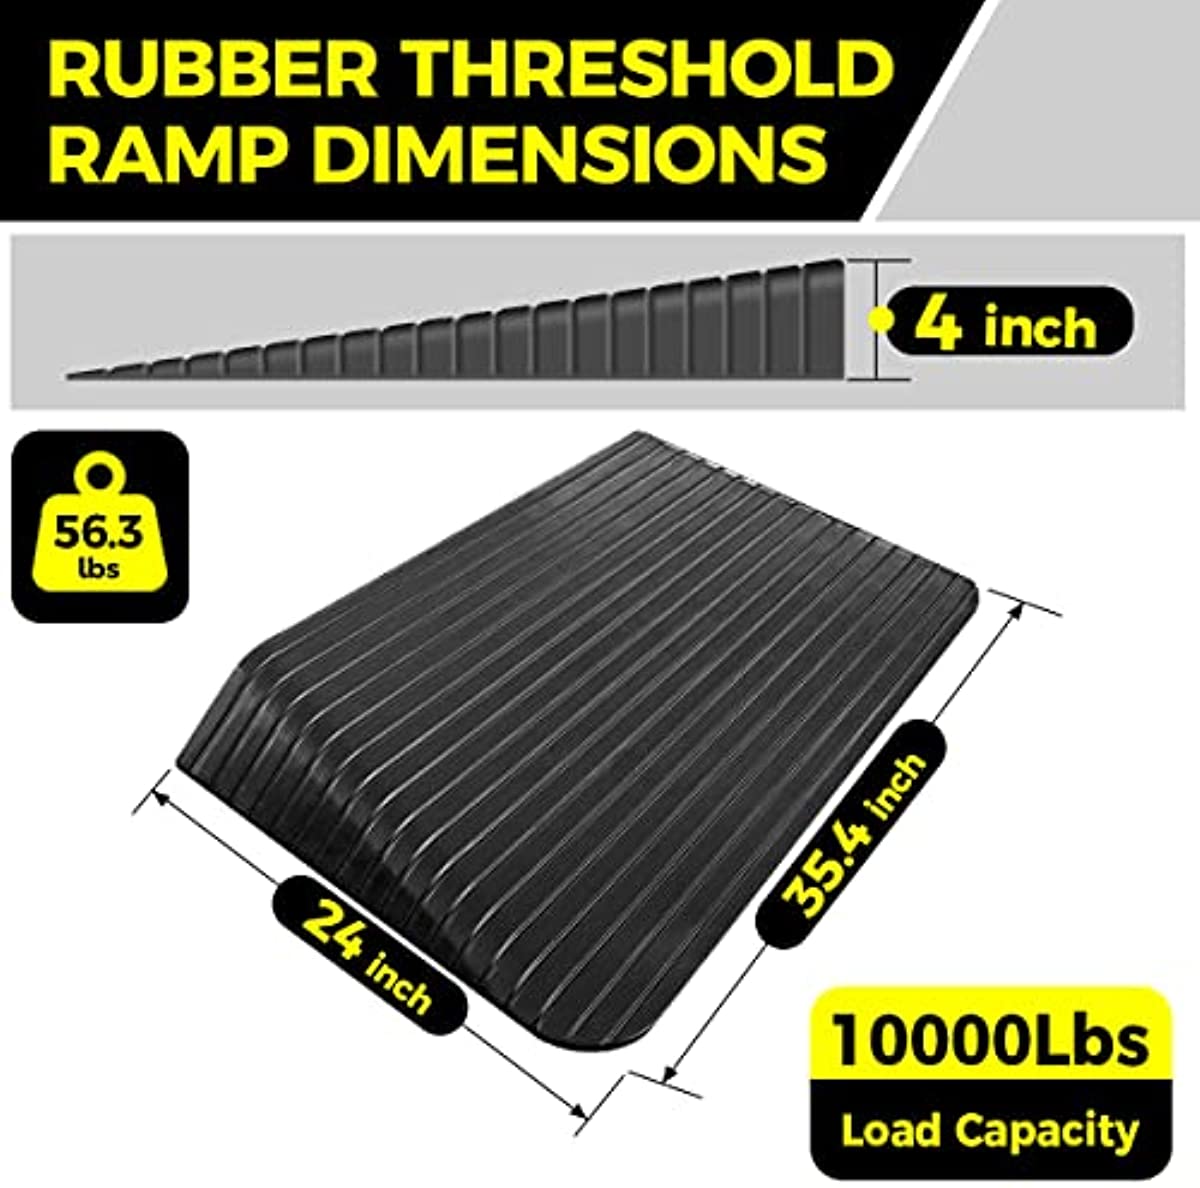 4\" Rise Rubber Threshold Ramp, Linkloos Wheelchair Ramp for Doorways, Recycled Rubber Solid Threshold Ramp 10000Lbs Load Capacity, Non-Slip Surface Portable Ramps for Scooter, Wheelchairs, Stroller